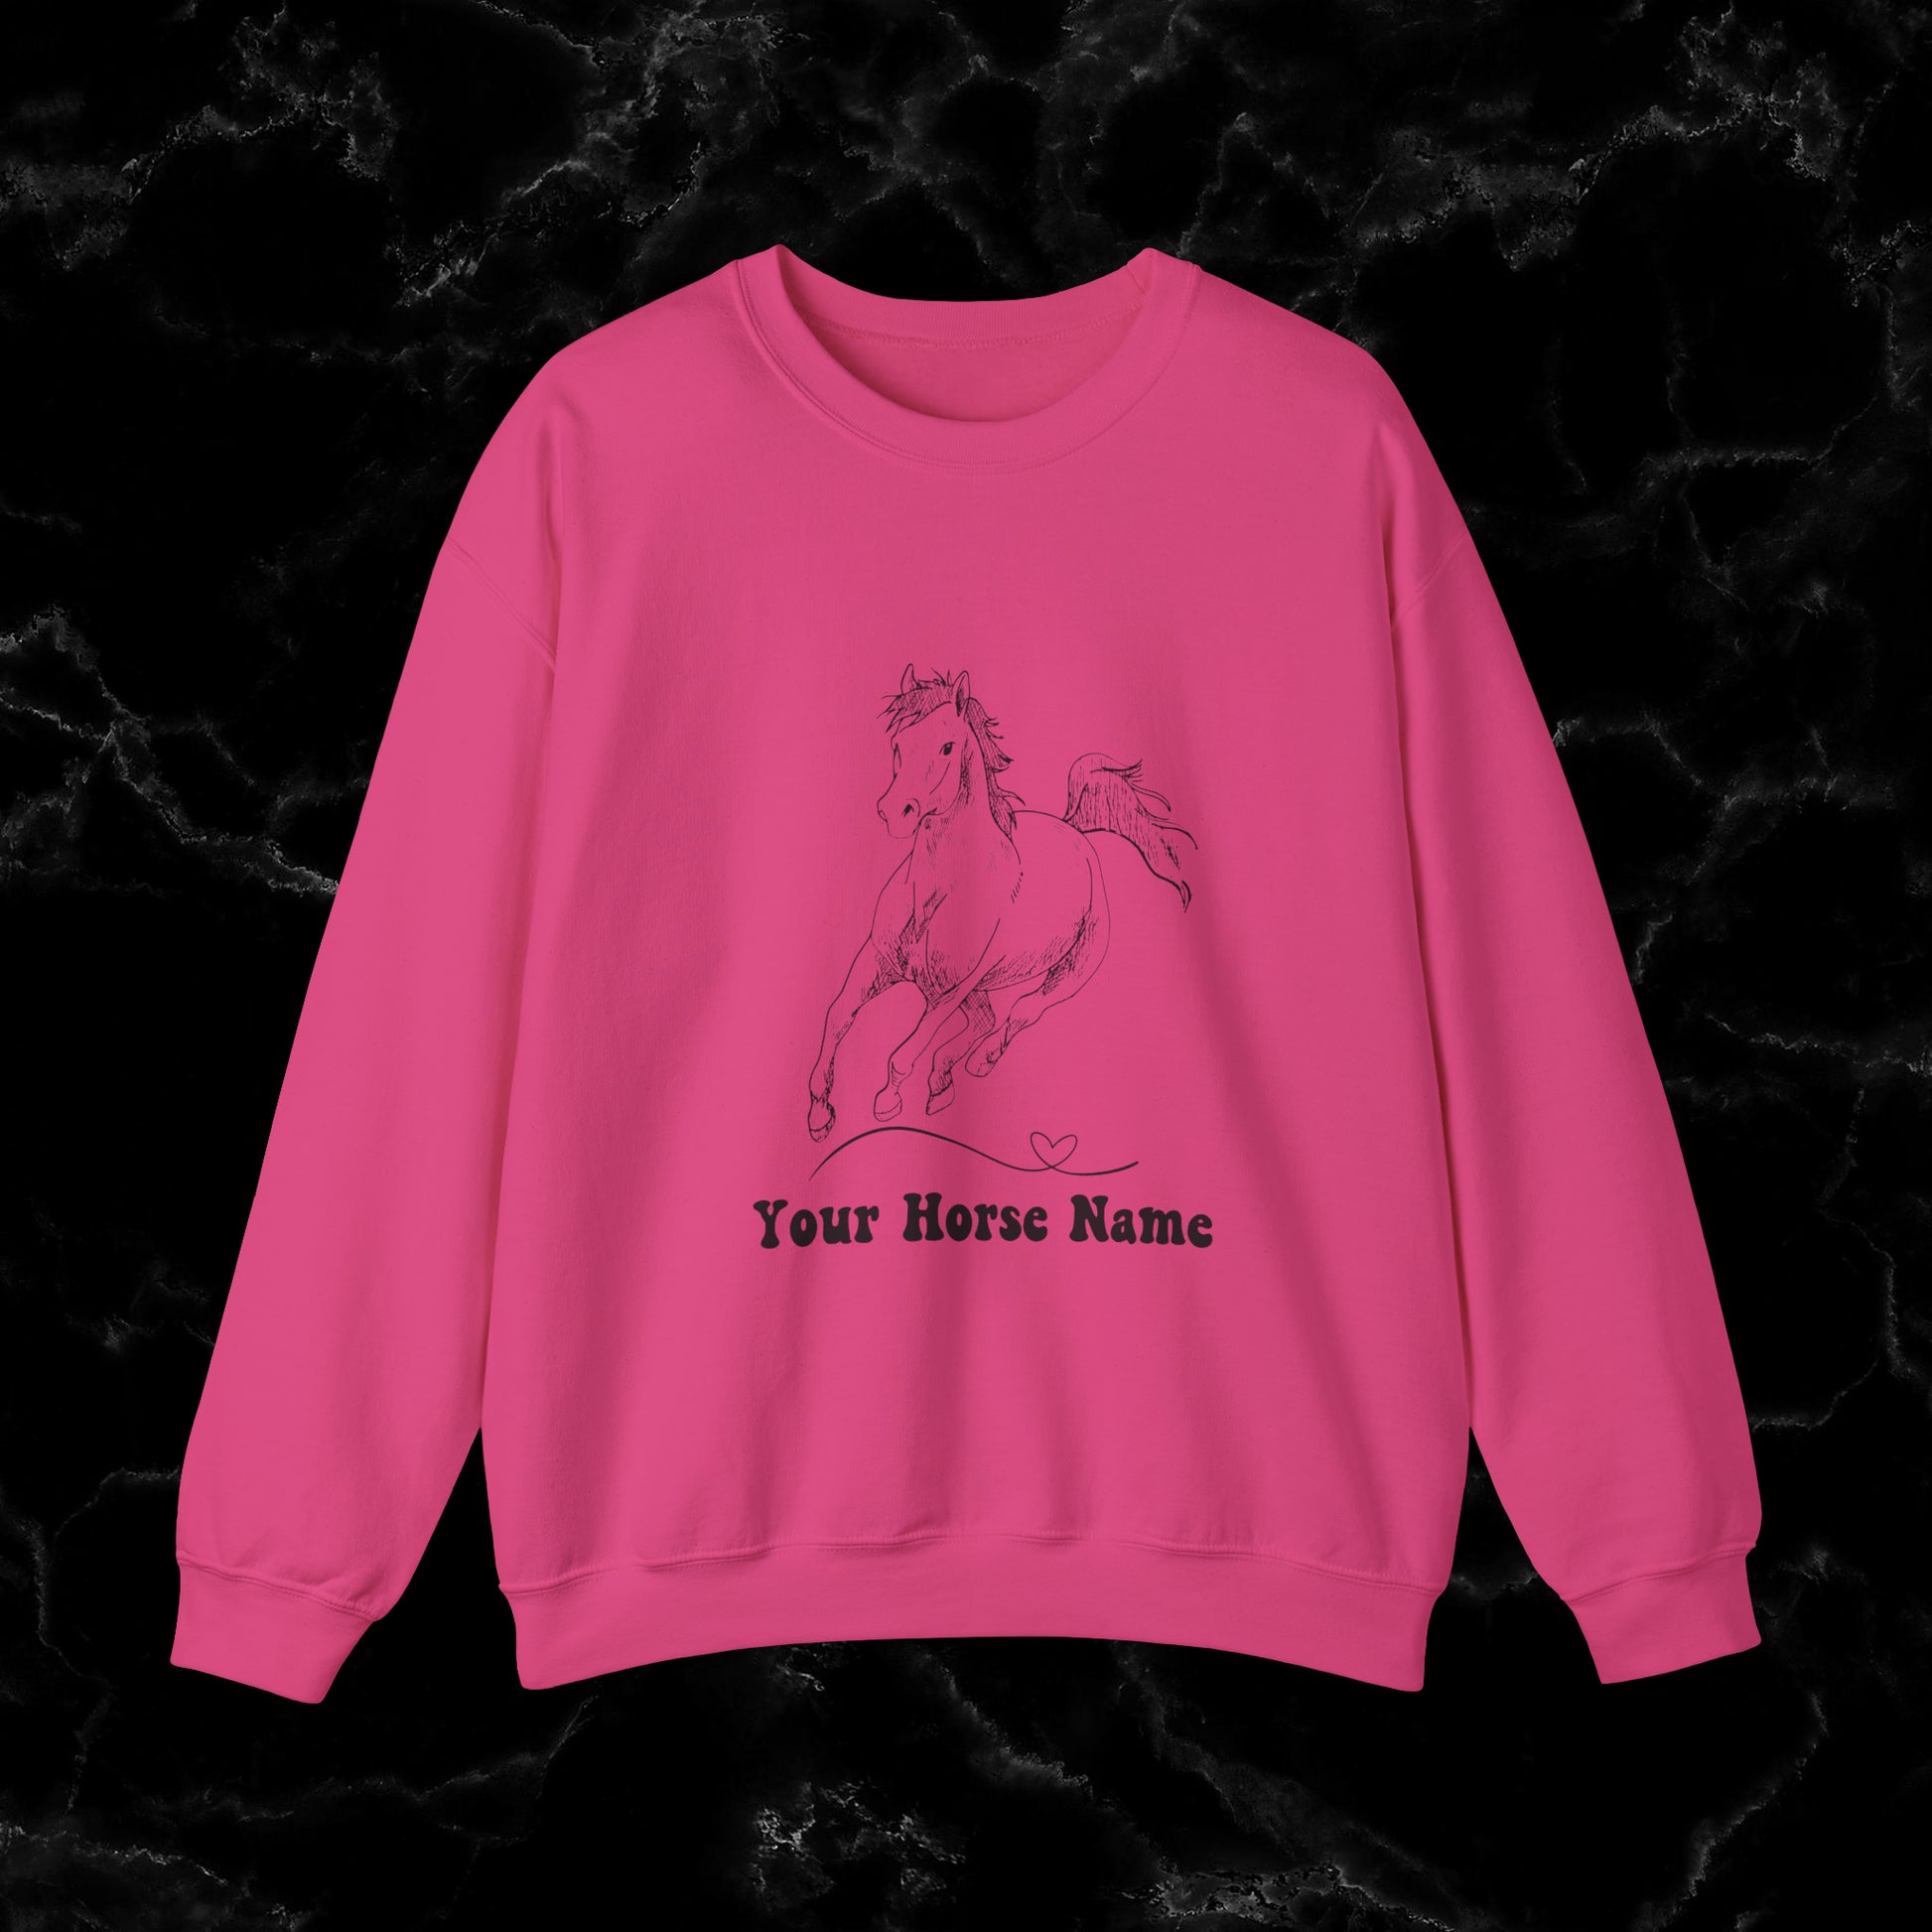 Personalized Horse Sweatshirt - Gift for Horse Owner, Perfect for Christmas, Birthdays, and Equestrian Enthusiasts - Wrap Up Warmth and Personal Connection with this Thoughtful Horse Lover's Gift Sweatshirt S Heliconia 